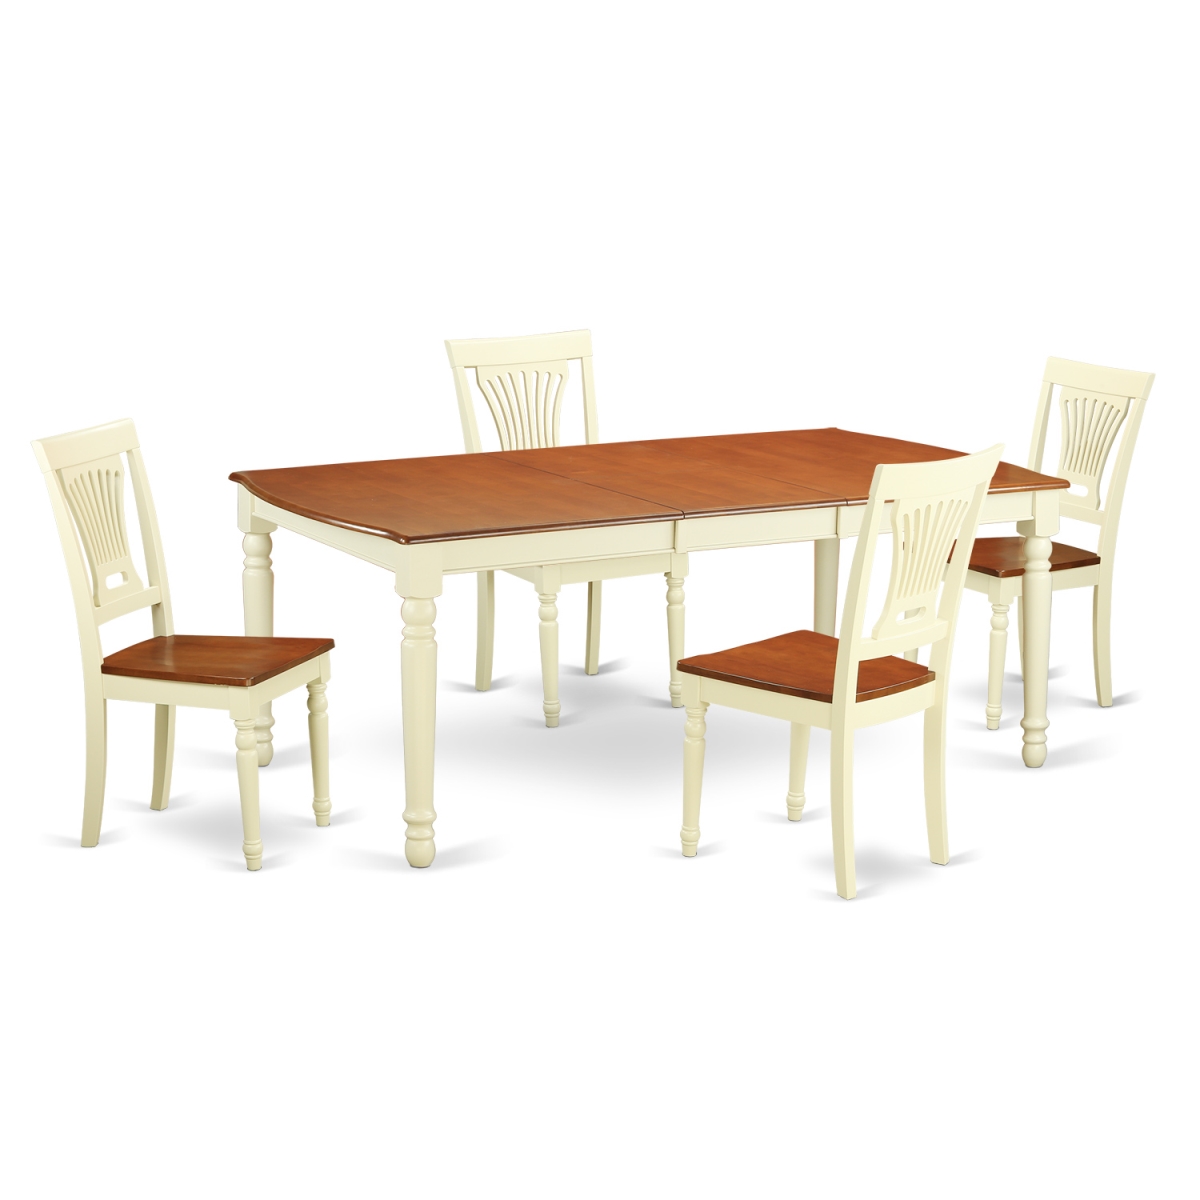 DOPL5-WHI-W Dining Set with 4 Table & 4 Chair, Buttermilk & Cherry - 5 Piece -  East West Furniture